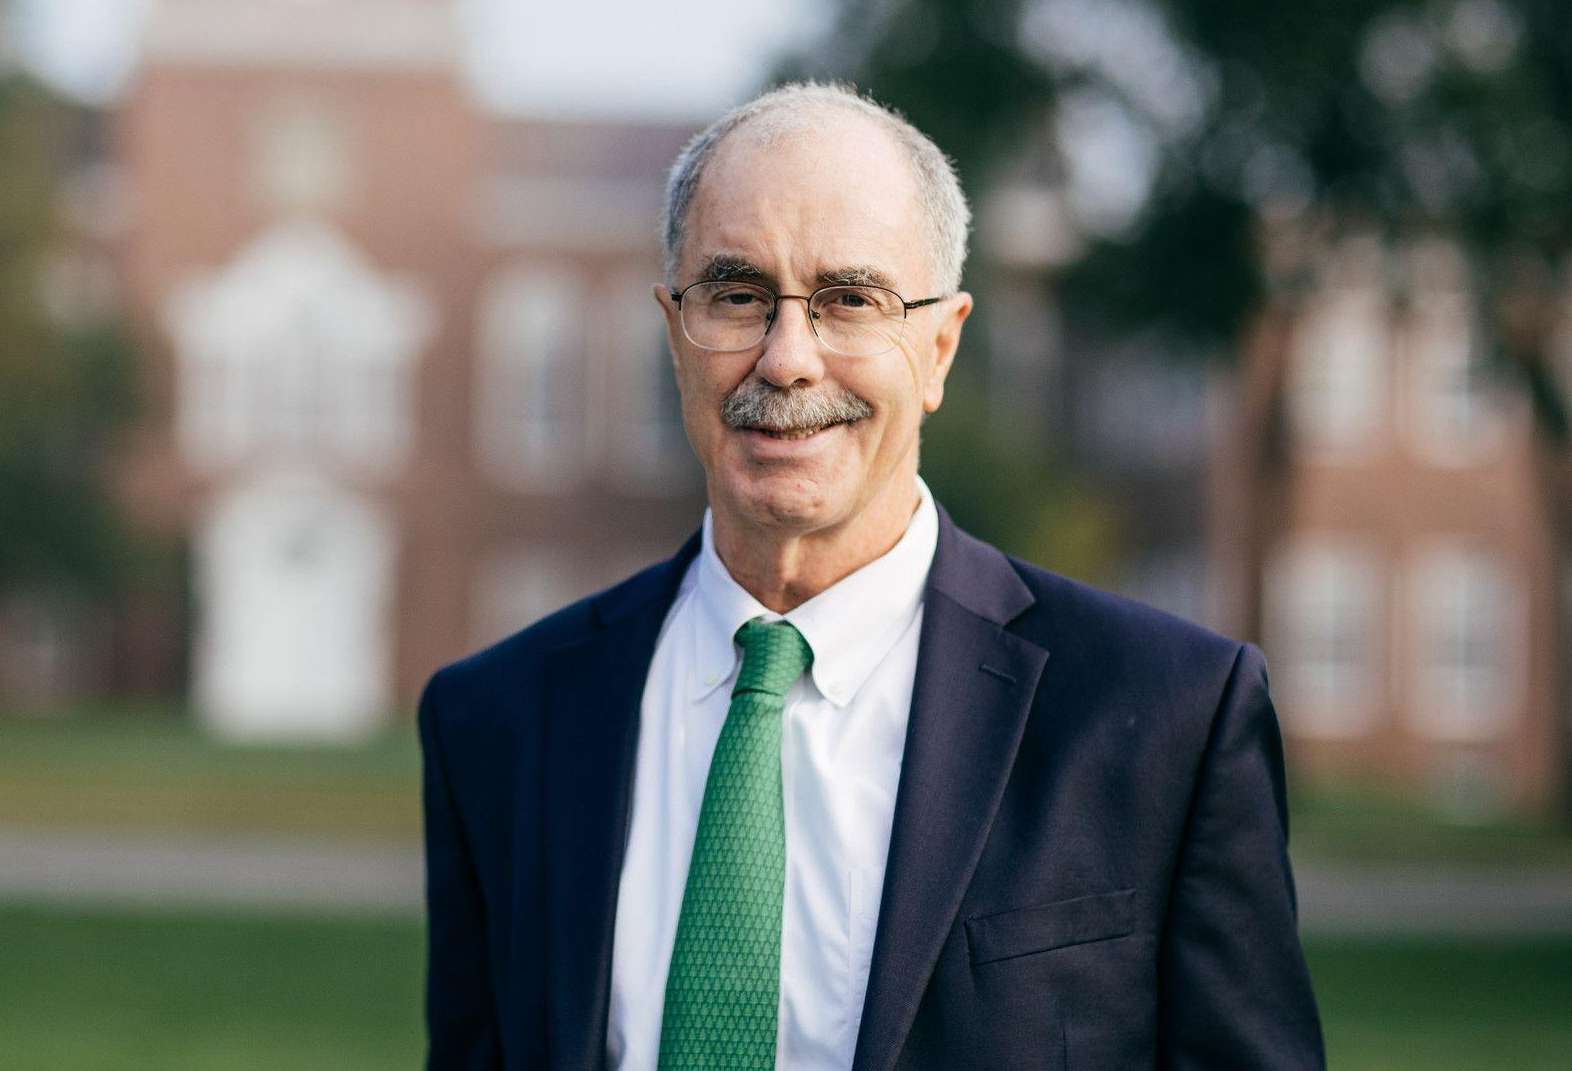 business-nh-magazine-dartmouth-college-president-to-step-down-in-2023